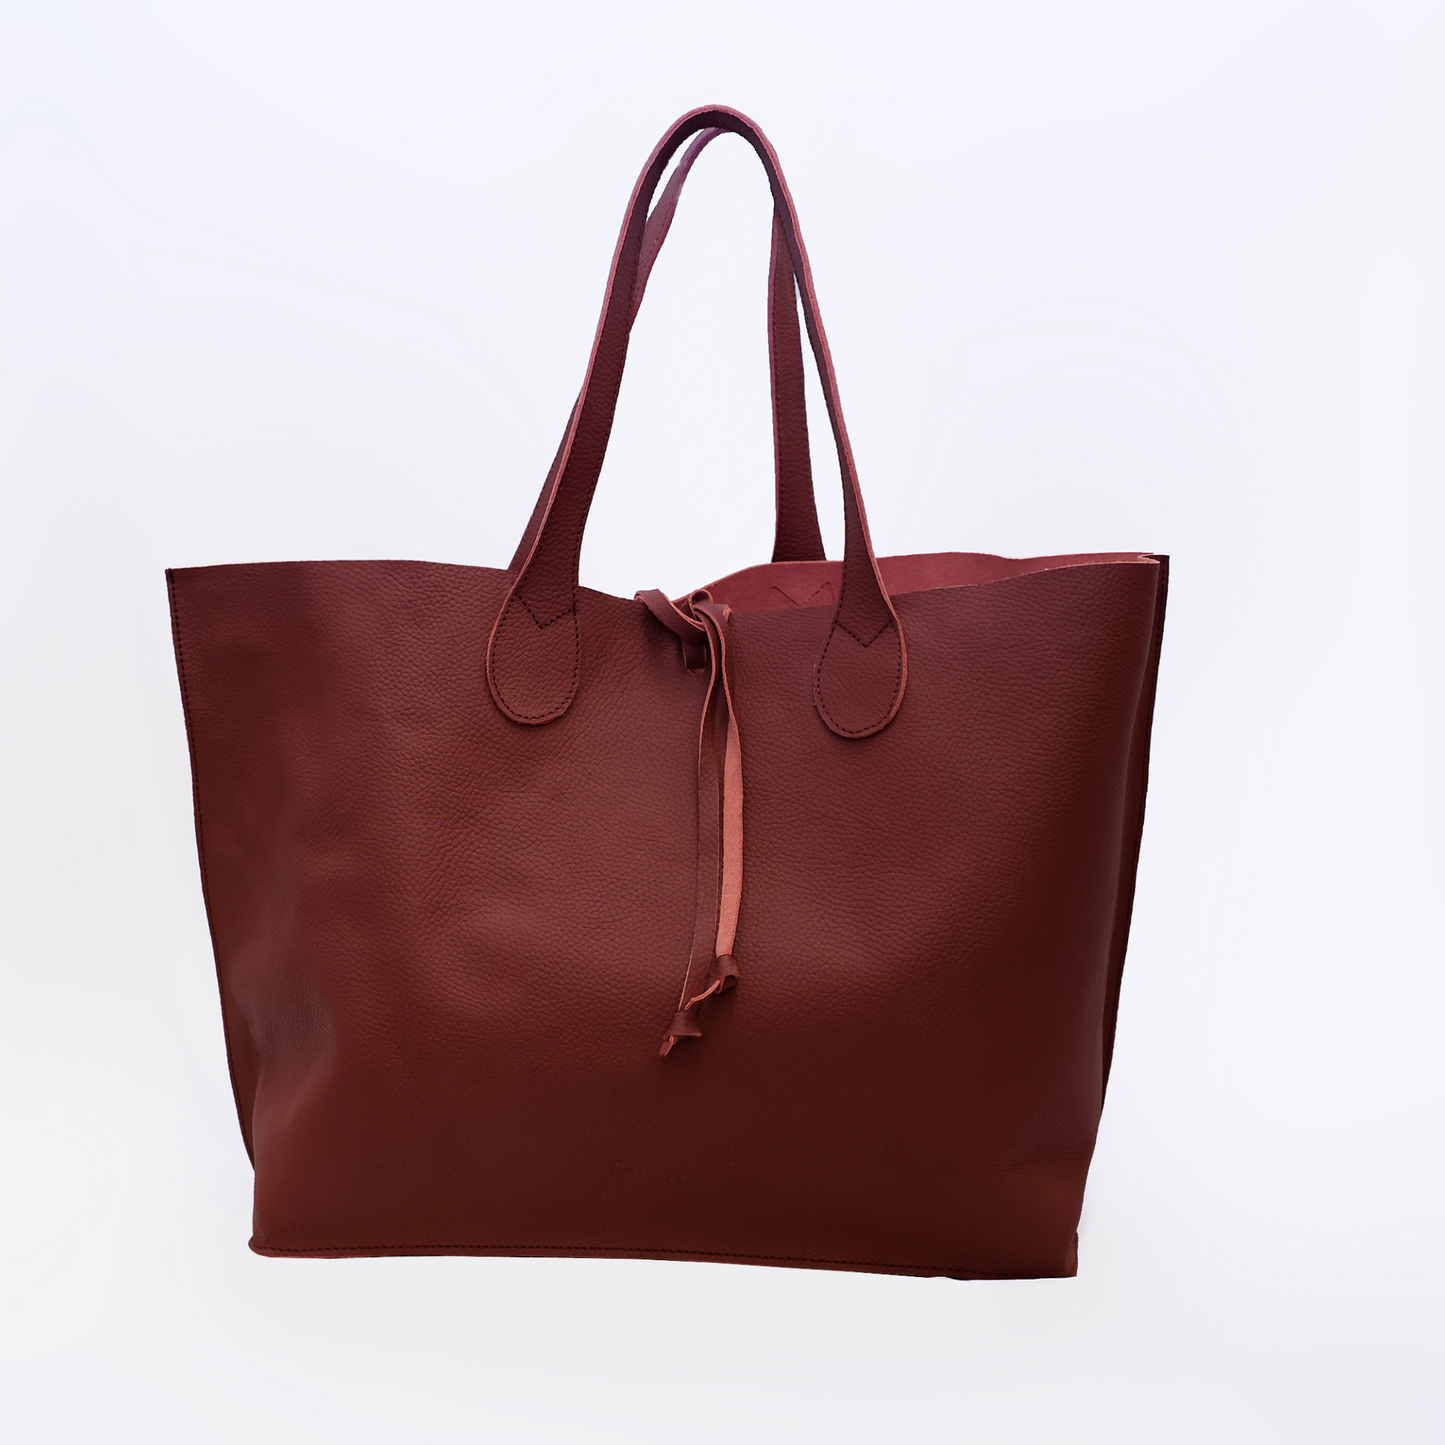 Francesca tote in Firebrick milled leather